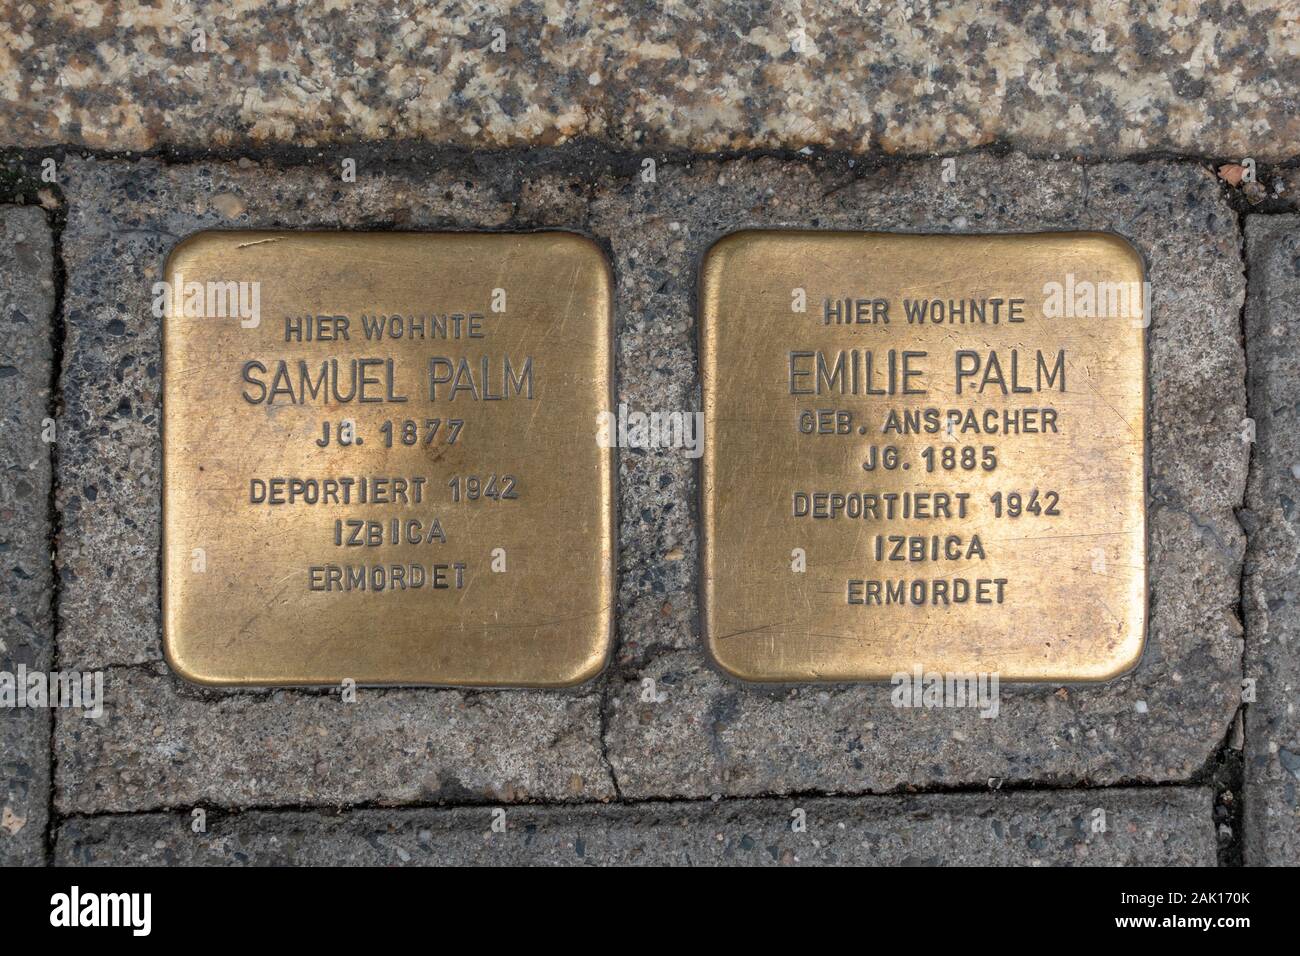 'Stumbling stones' Holocaust memorial markers for Samuel and Emilie Palm in Coburg, Bavaria, Germany. Stock Photo